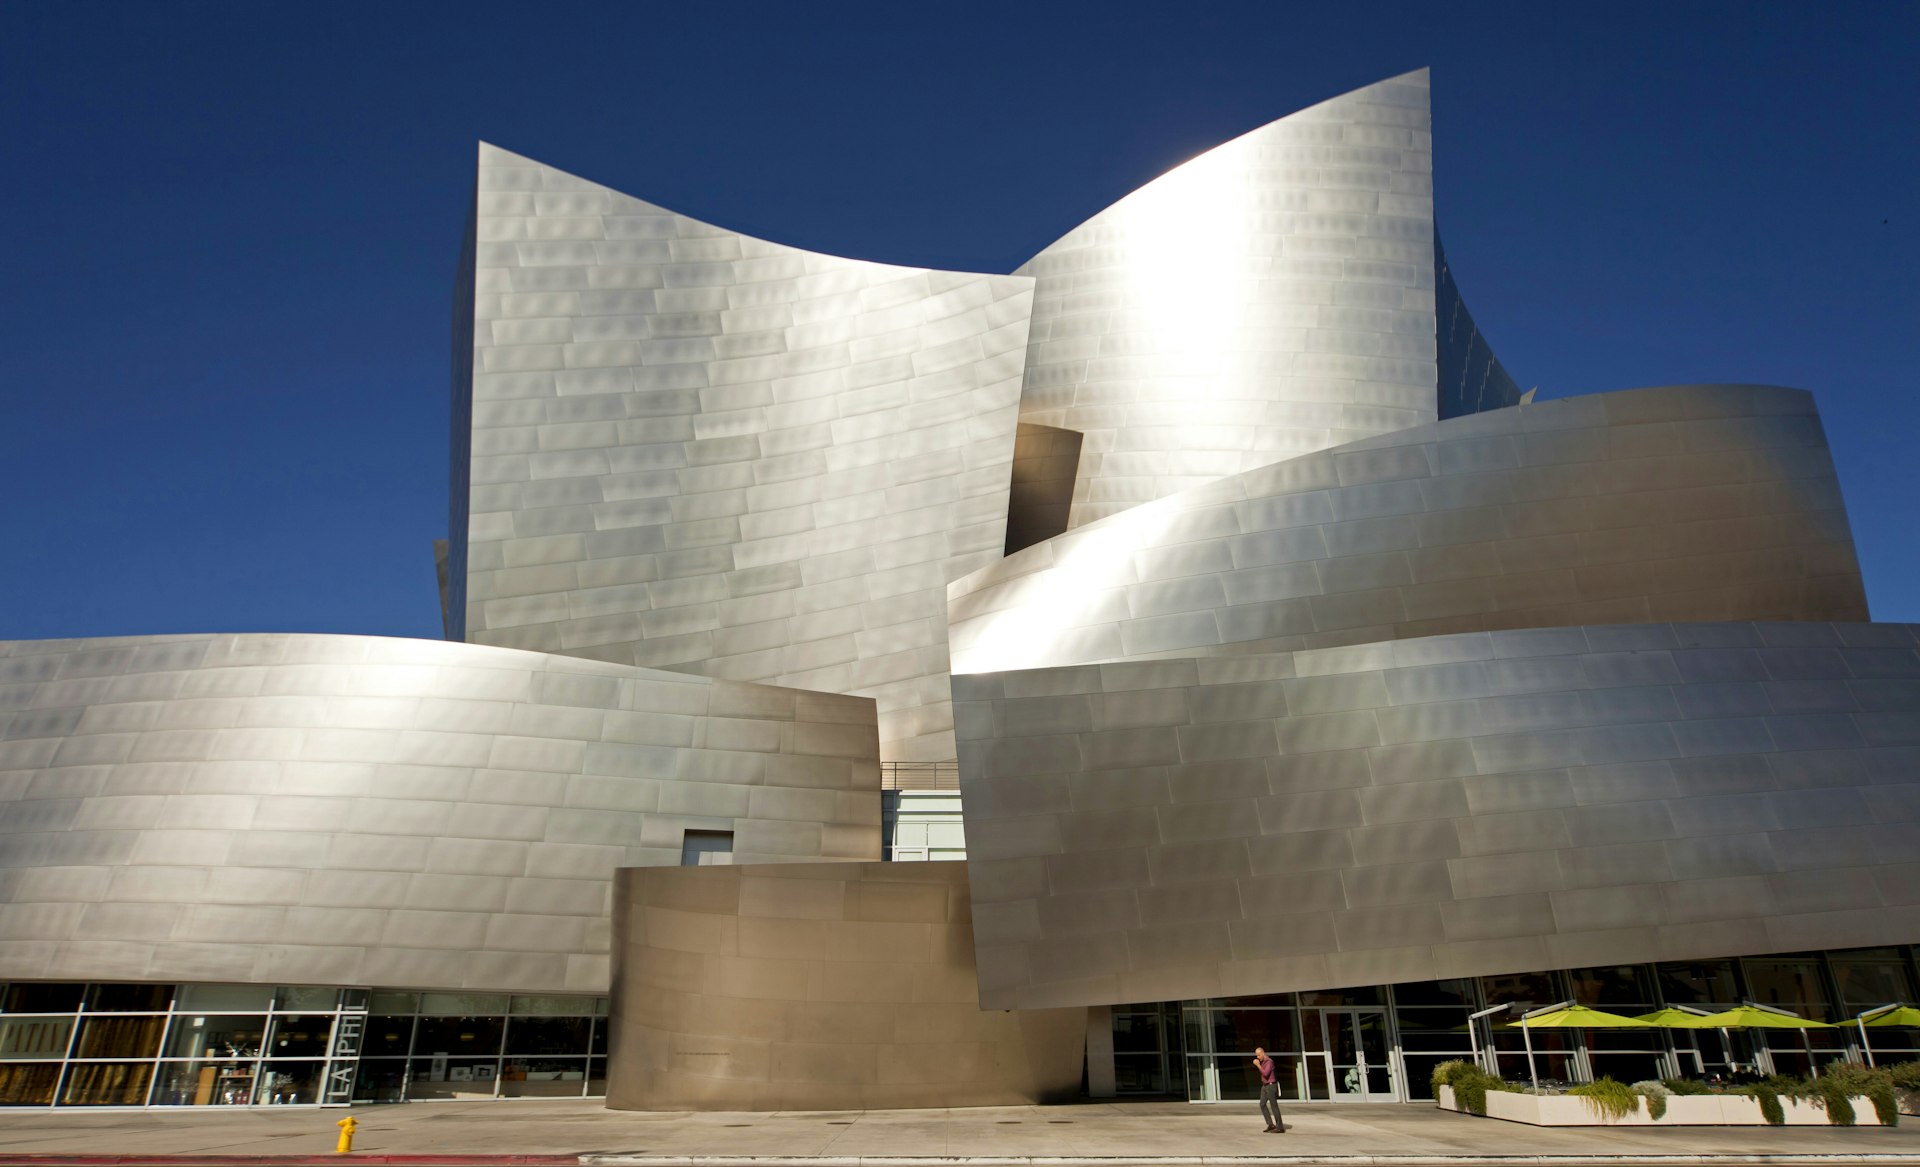 Frank Gehry's Walt Disney Concert Hall contributed to the regeneration of Downtown LA. Image by Peter Schickert / Getty